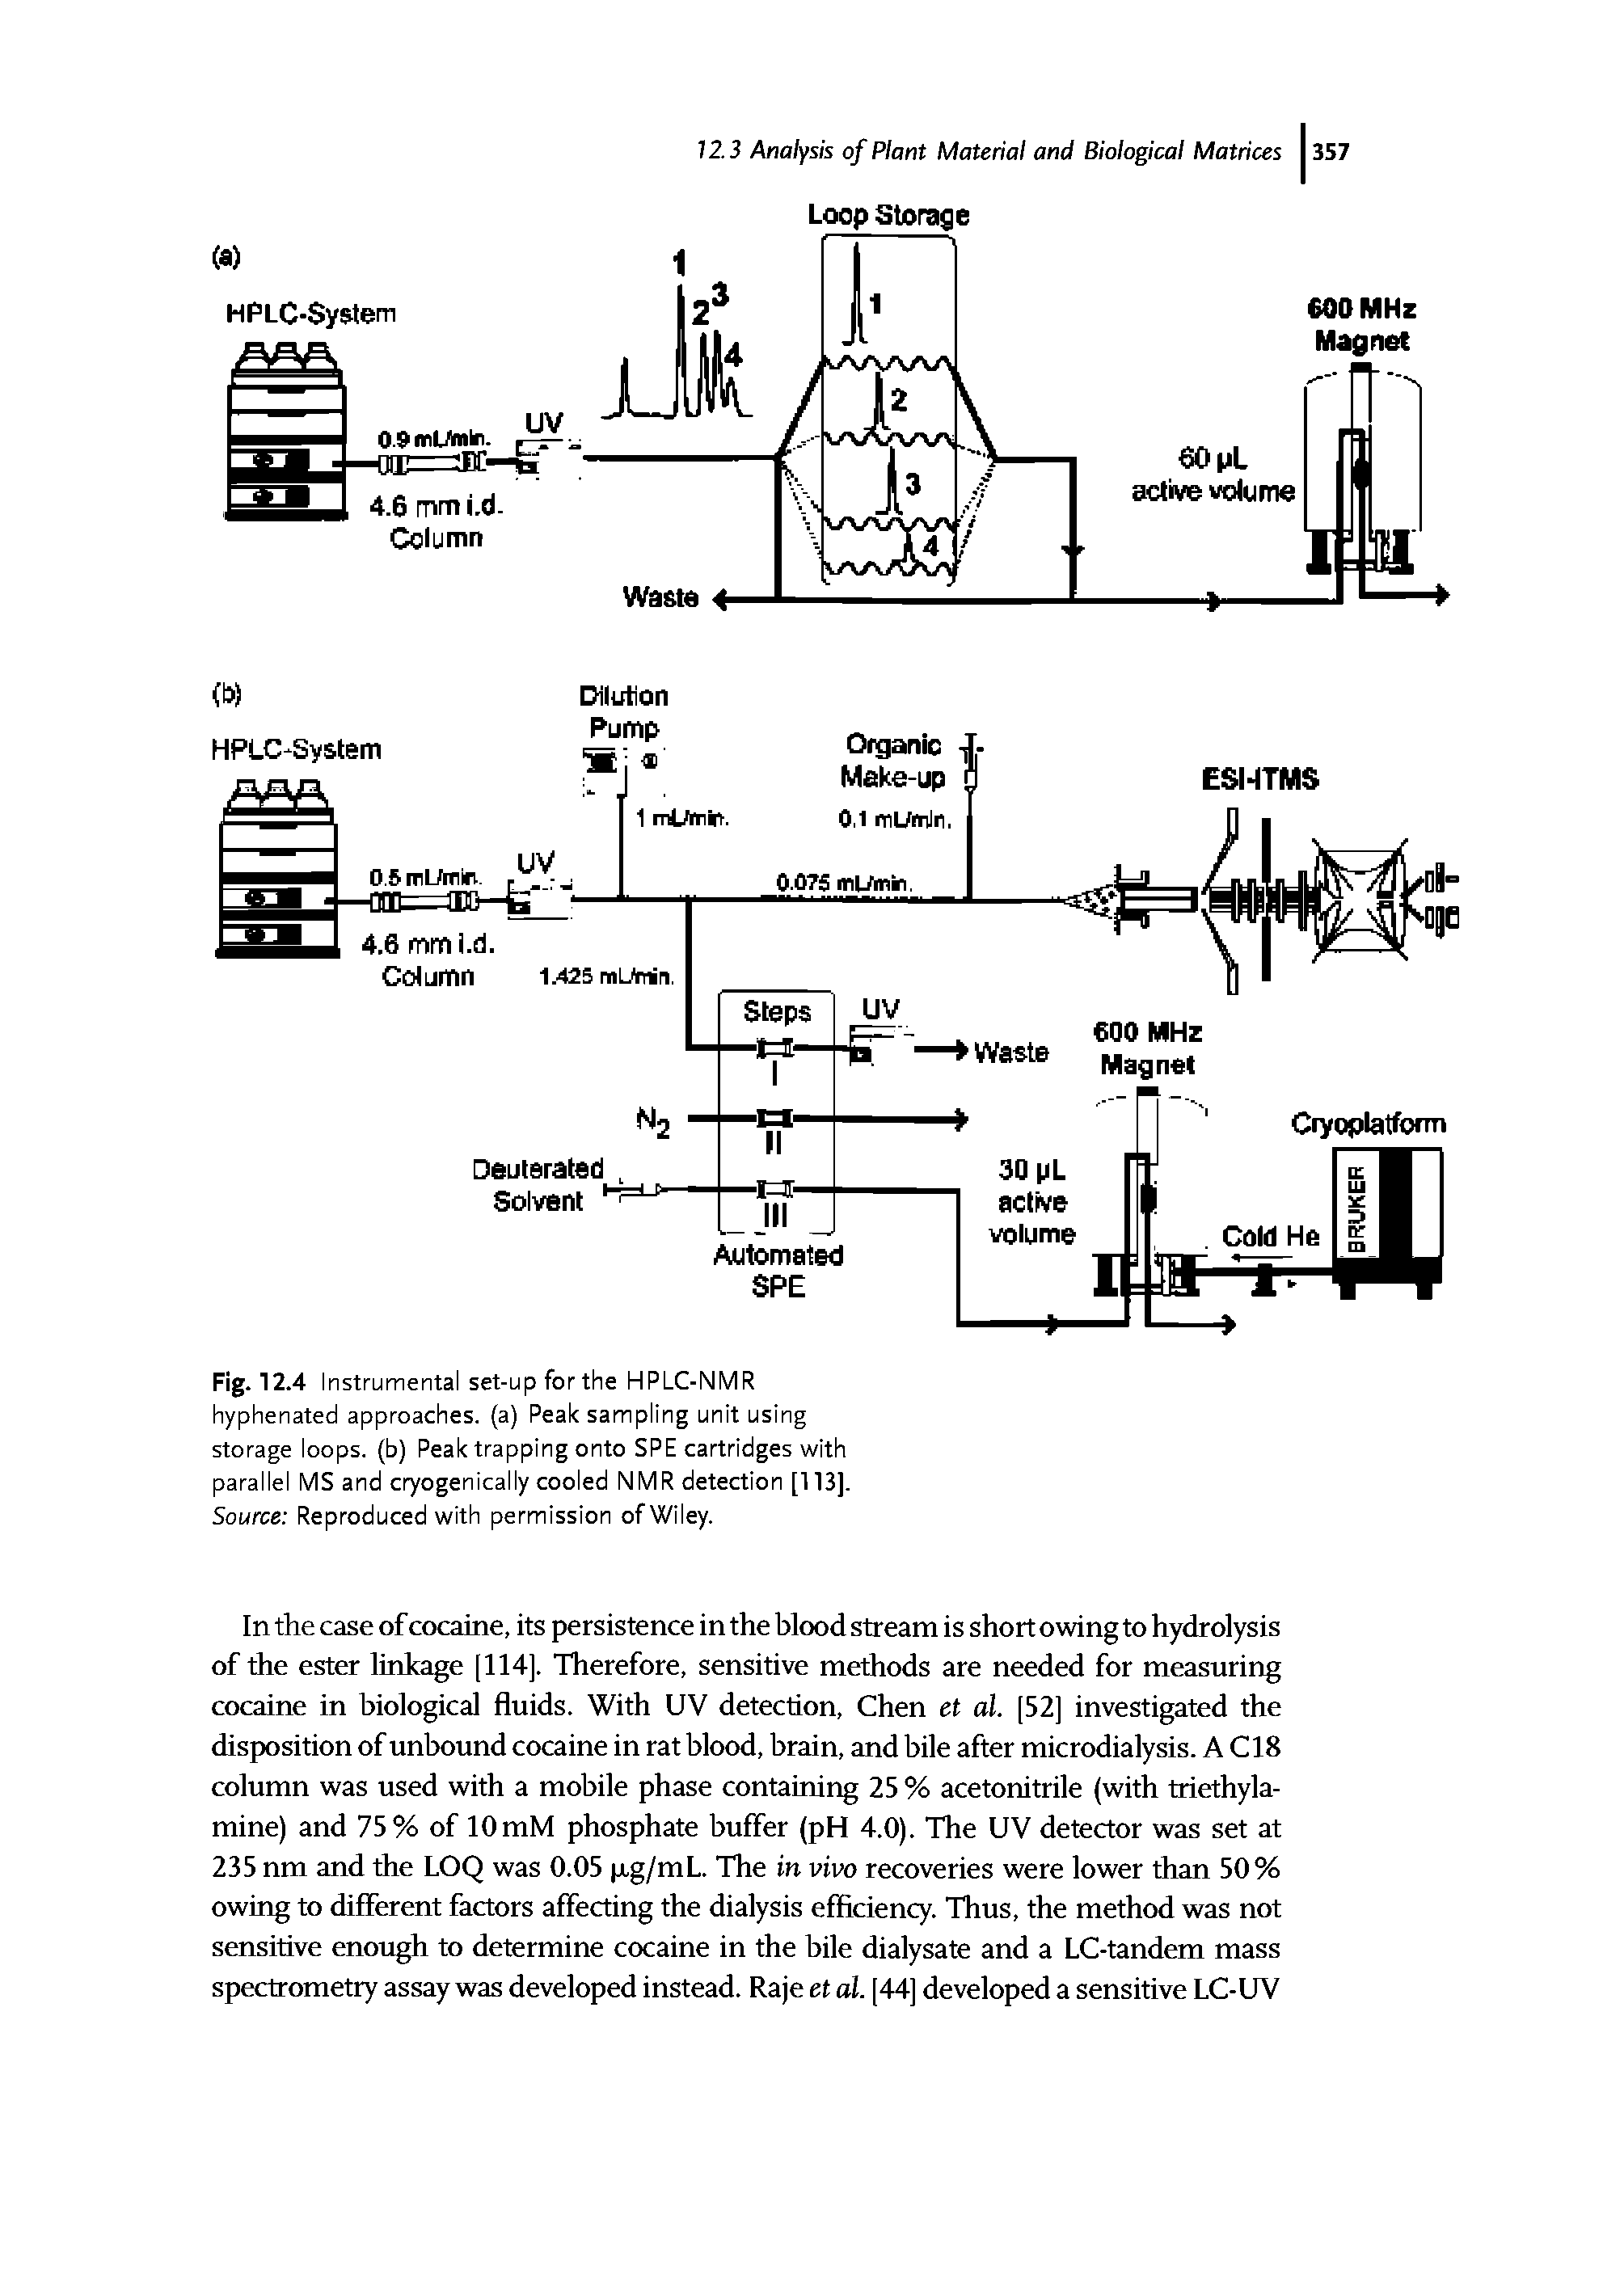 Fig. 12.4 Instrumental set-up for the HPLC-NMR hyphenated approaches, (a) Peak sampling unit using storage loops, (b) Peak trapping onto SPE cartridges with parallel MS and C70genically cooled NMR detection [113], Source Reproduced with permission of Wiley.